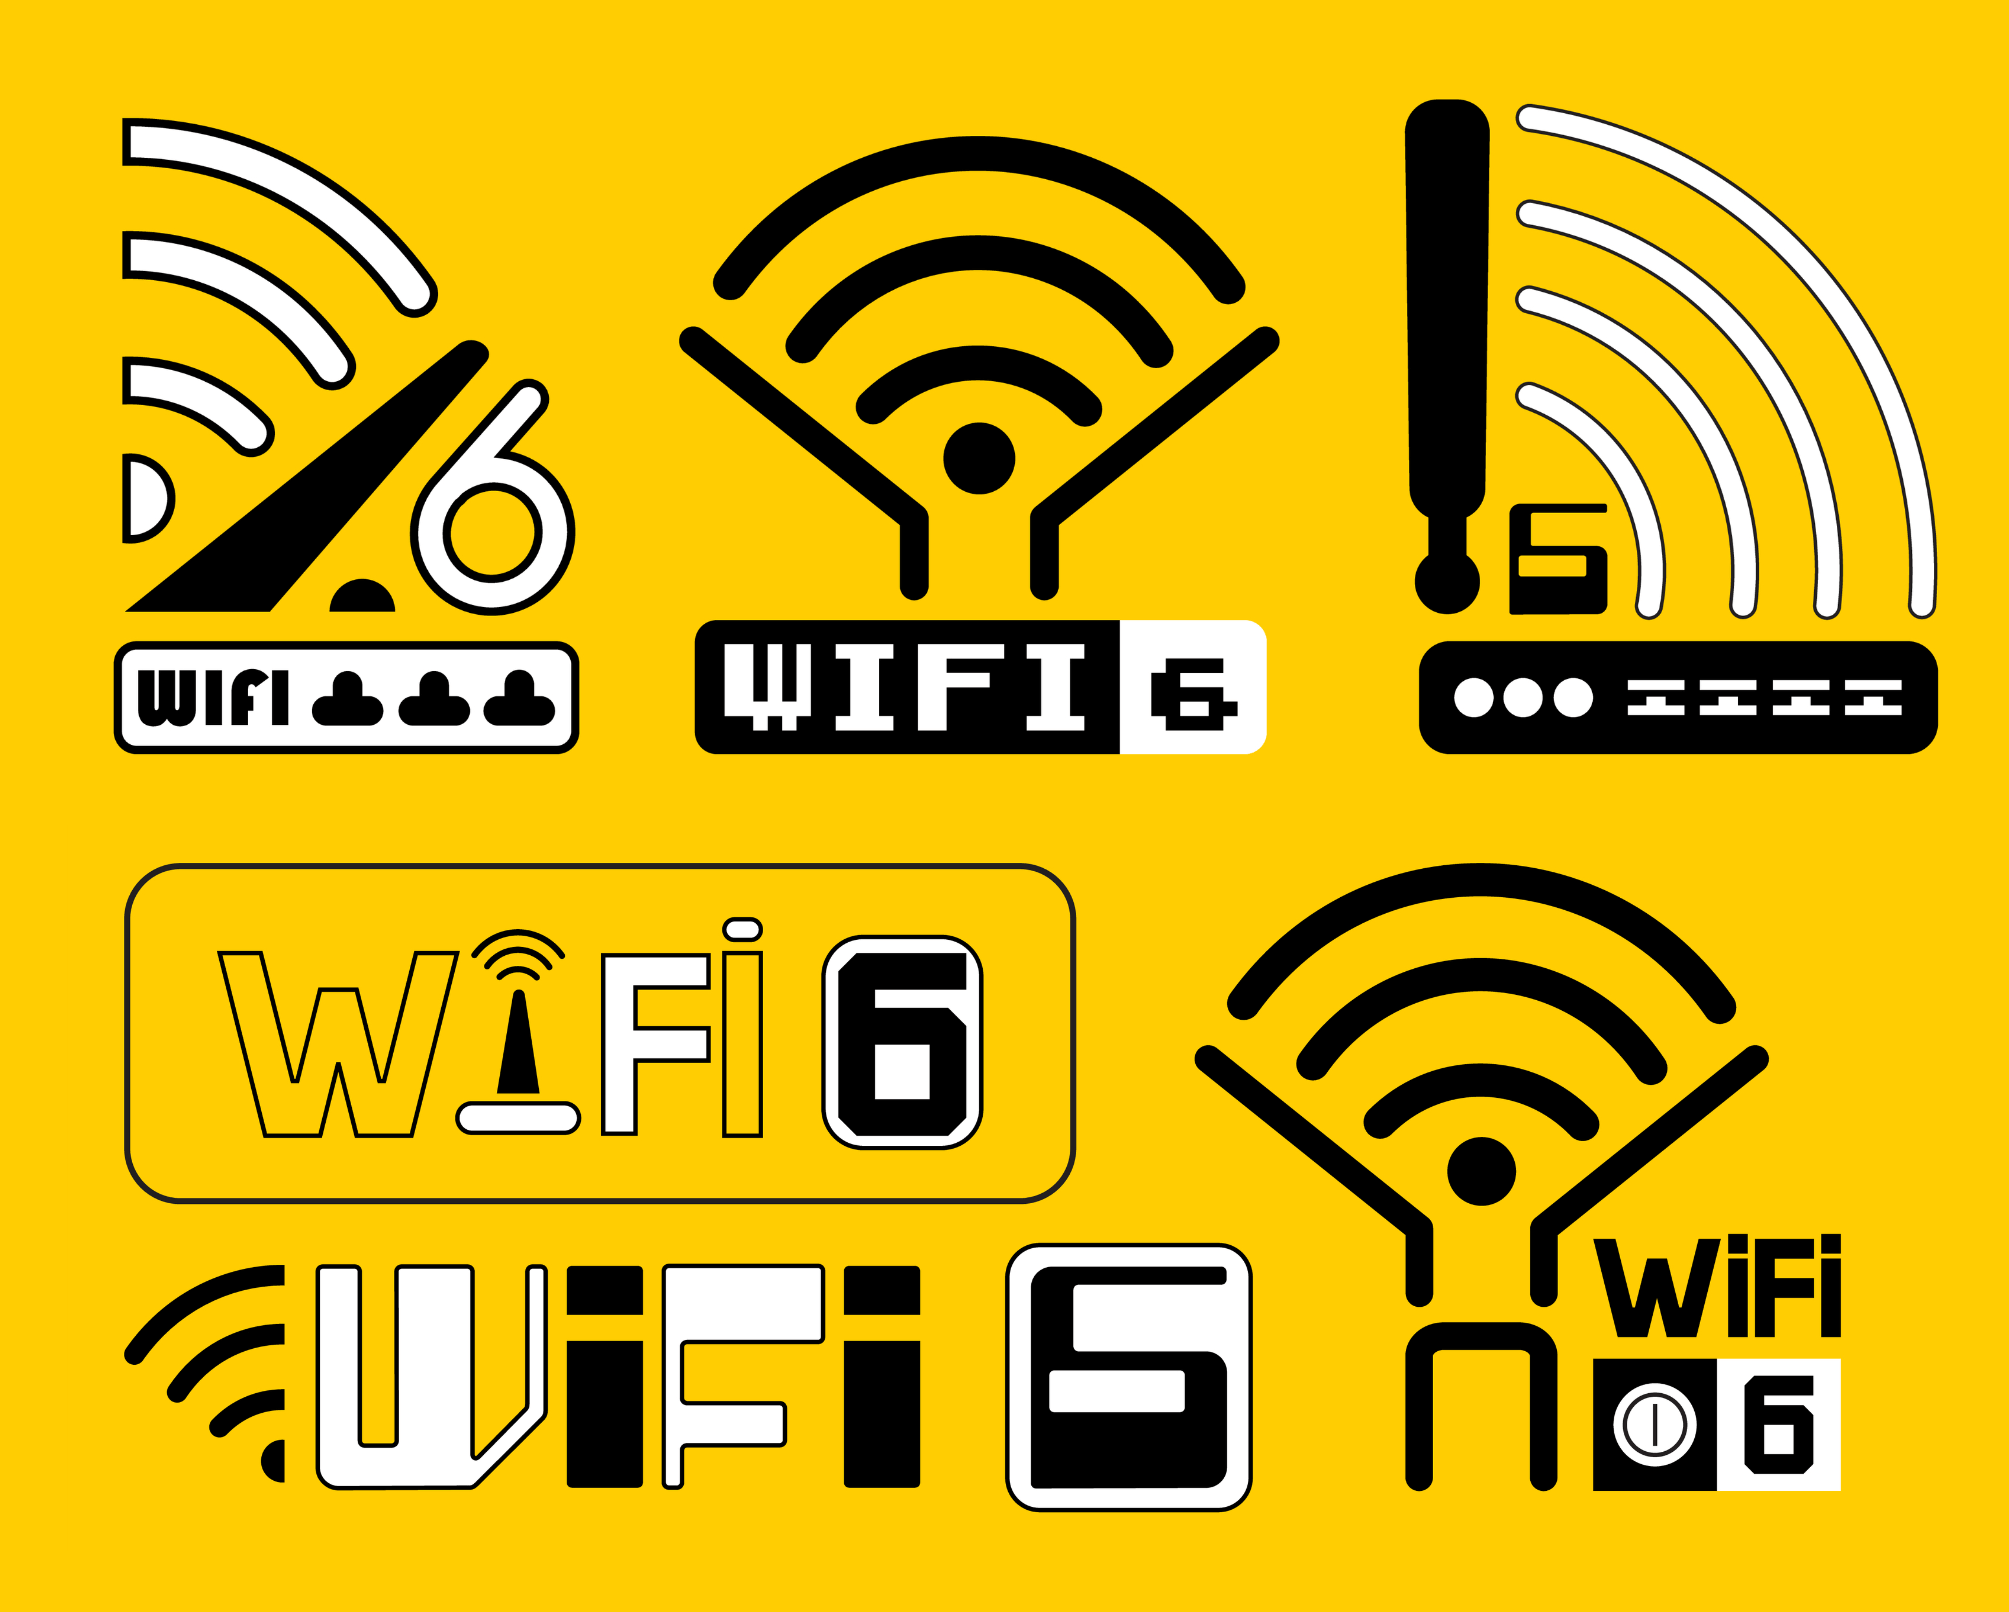 Opinion: Wi-Fi 6E opens new possibilities for fast wireless connectivity